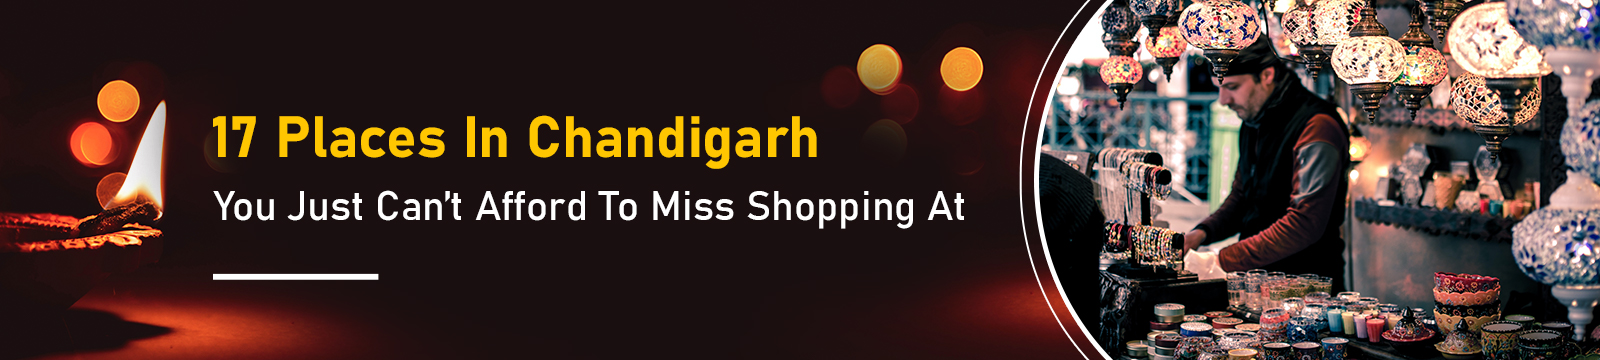 17 Places In Chandigarh You Just Can’t Afford To Miss Shopping At